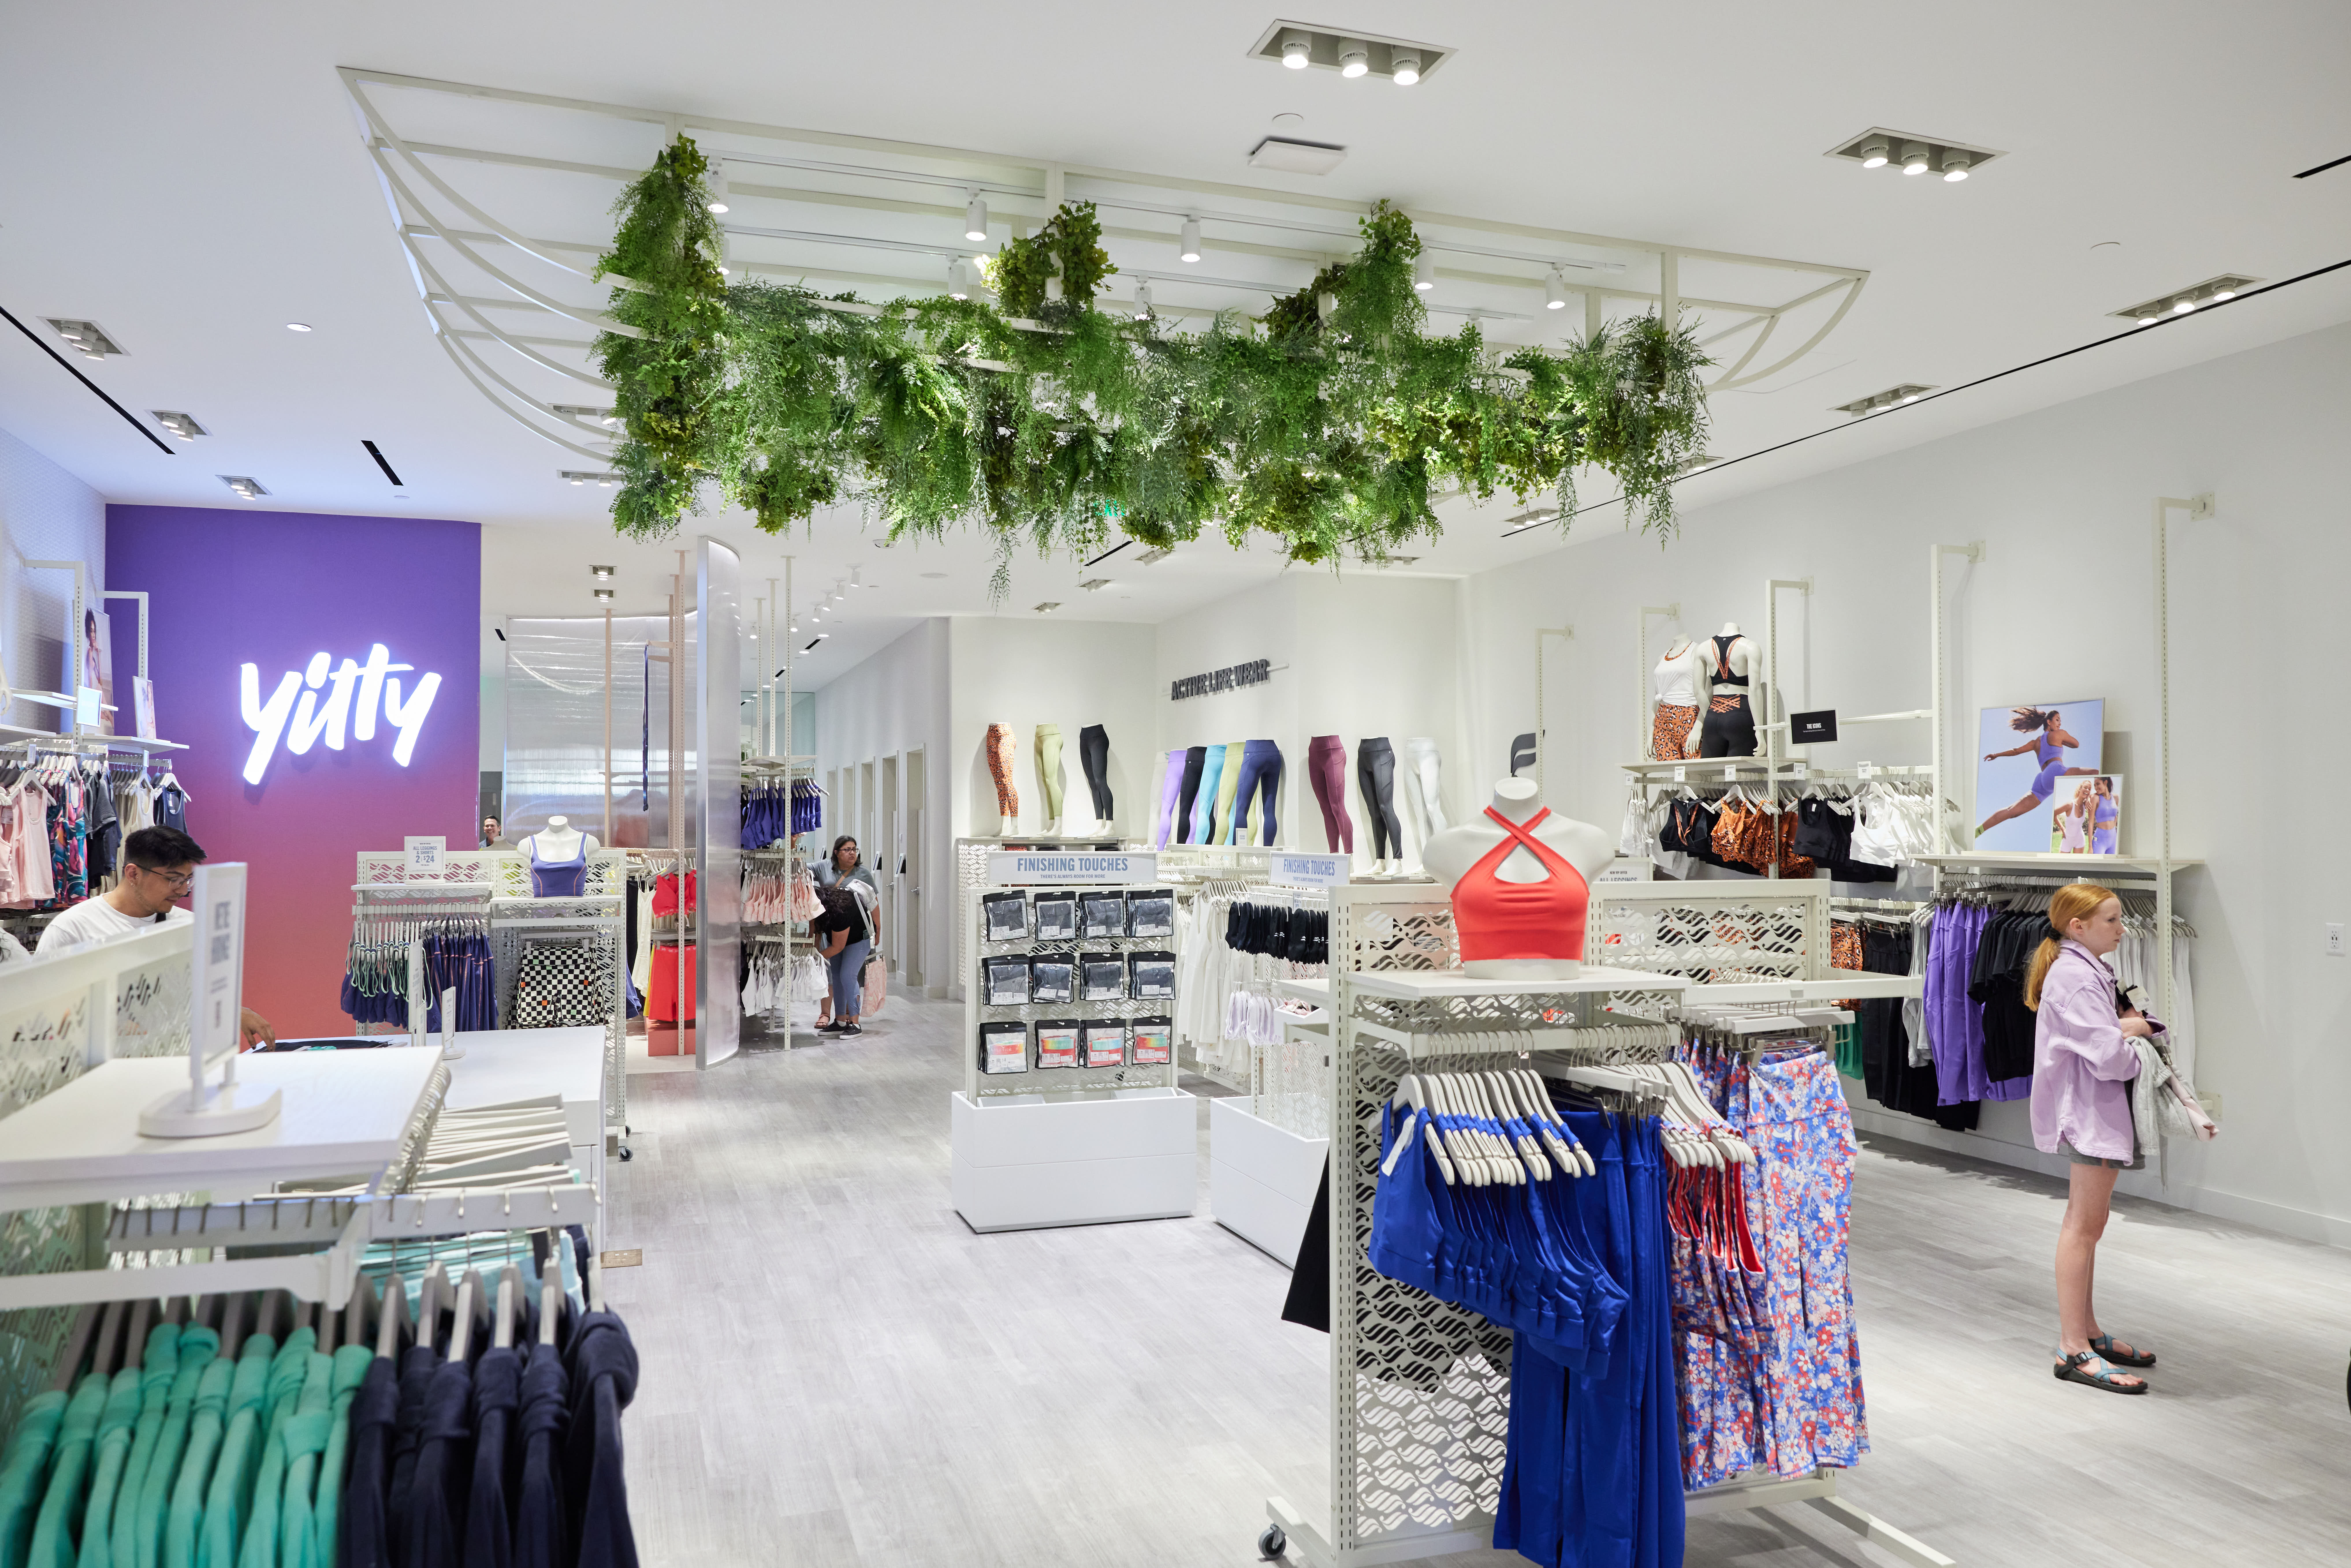 Glendale Galleria - YITTY by LIZZO is now open at Glendale